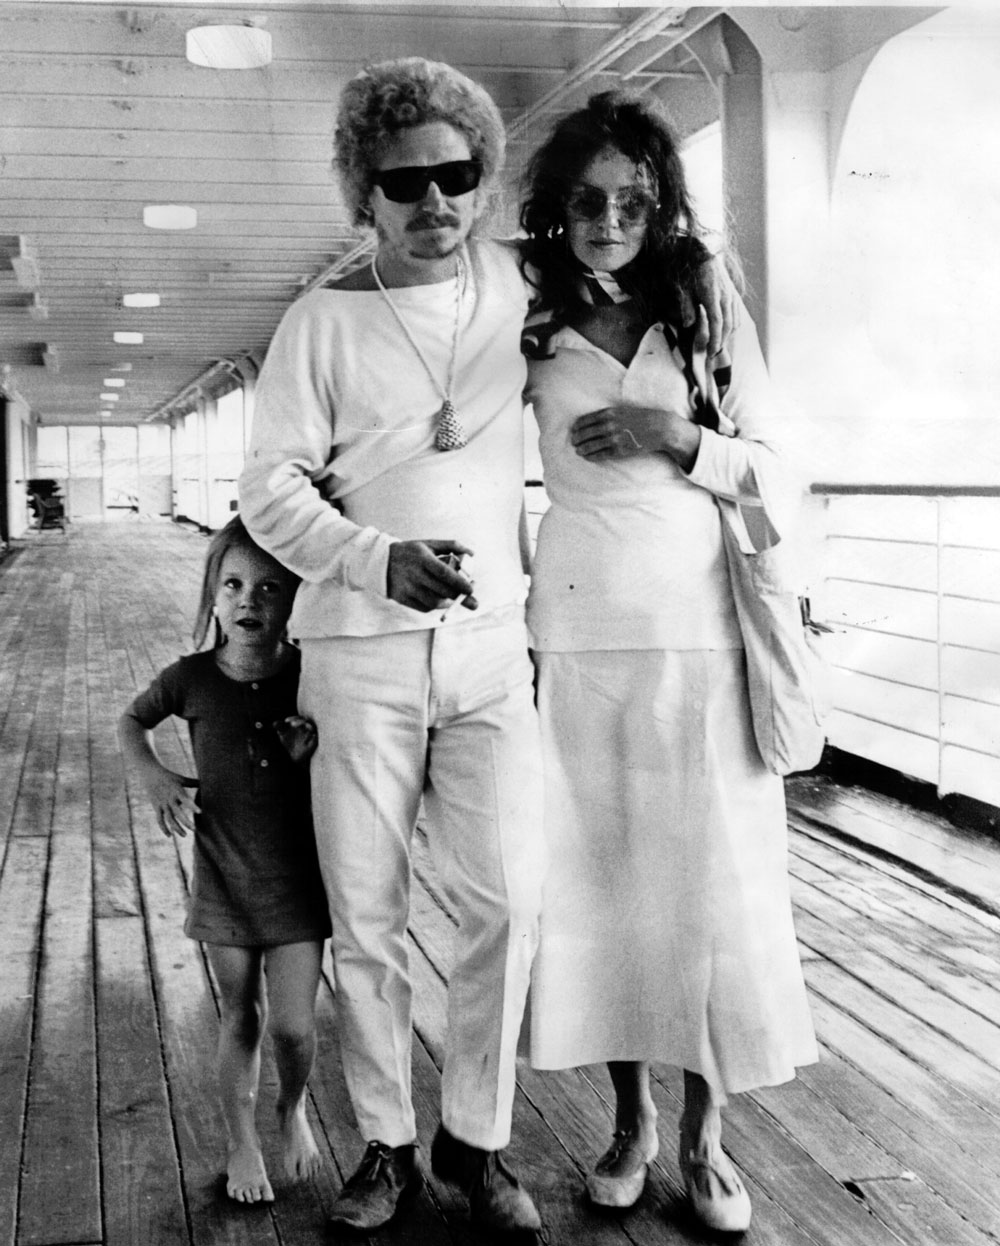 A photograph of the Whiteley Family returning to Sydney. Brett has his arm around Wendy and their daughter, Arkie, playfully hides behind him.